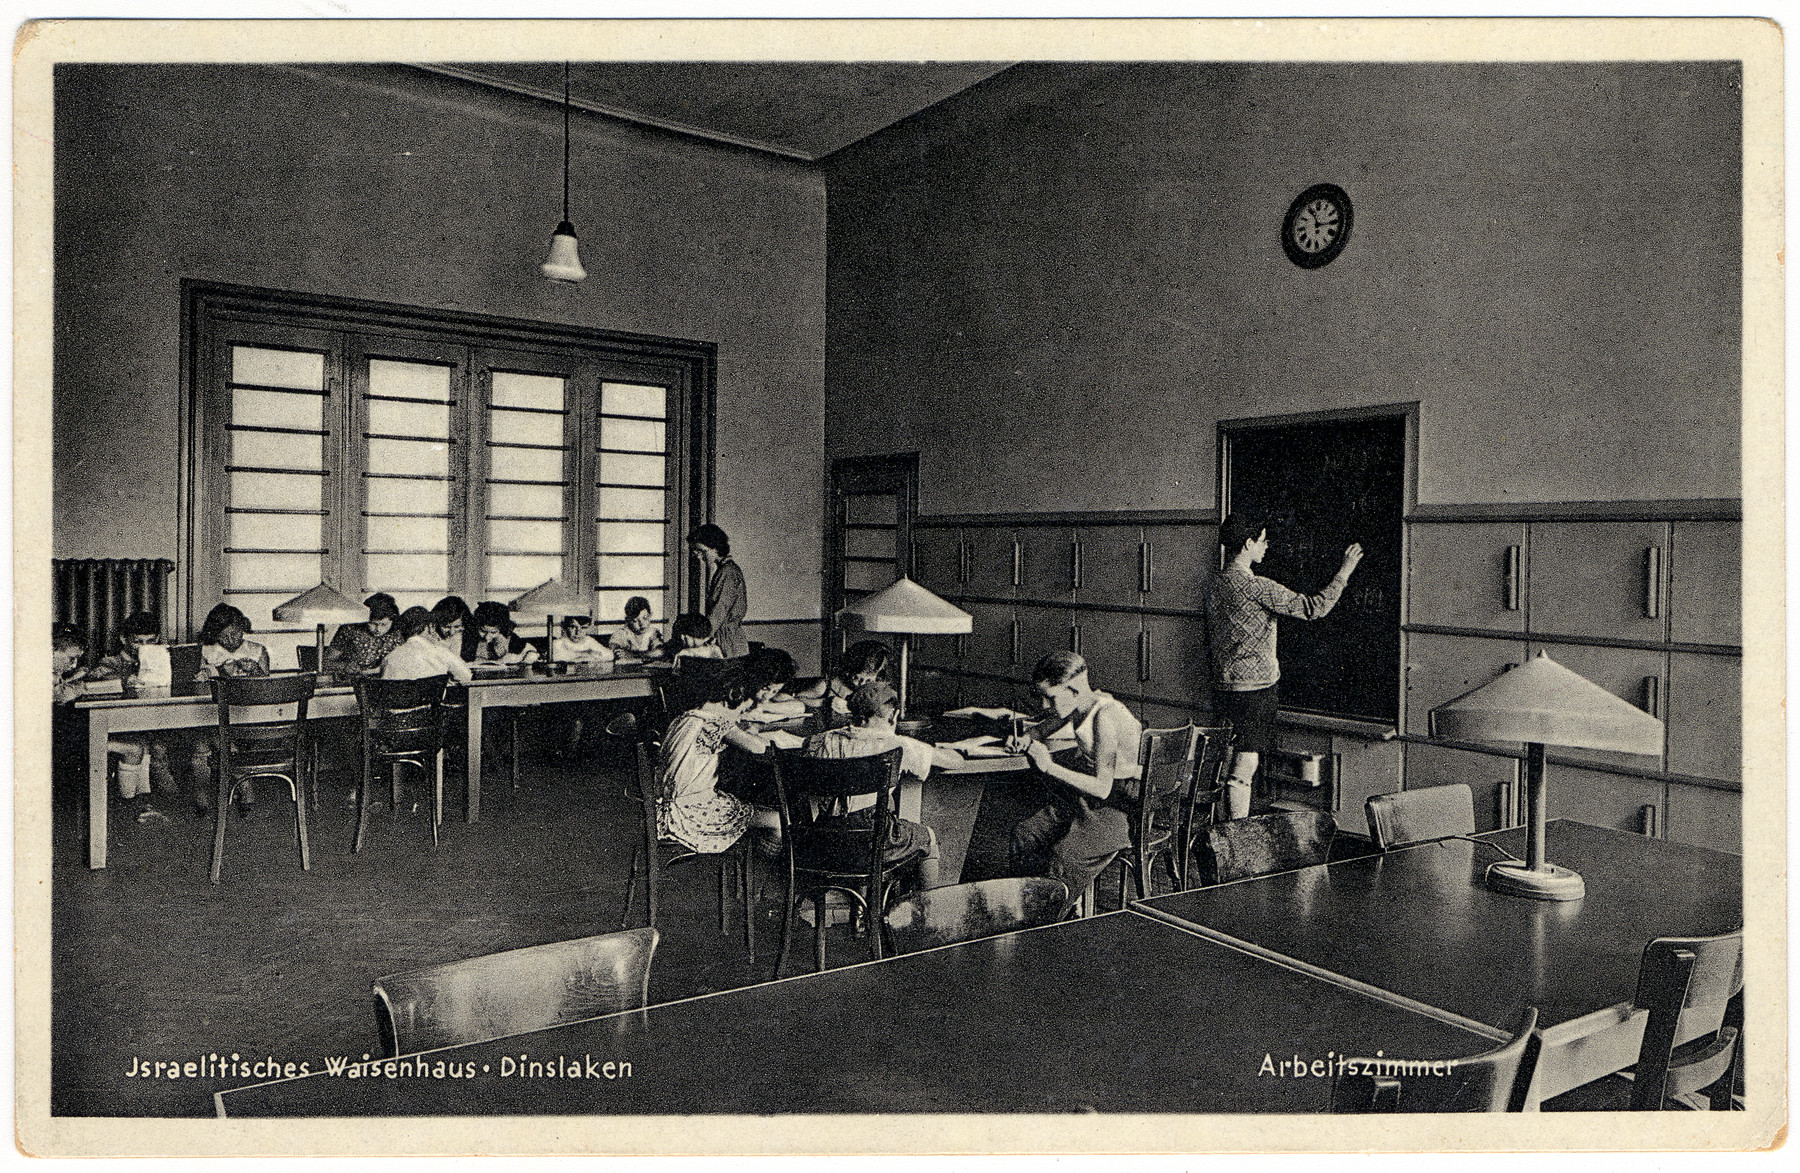 Children study in the classroom of the Waisenhaus of the Dinslaken Jewish orphanage.